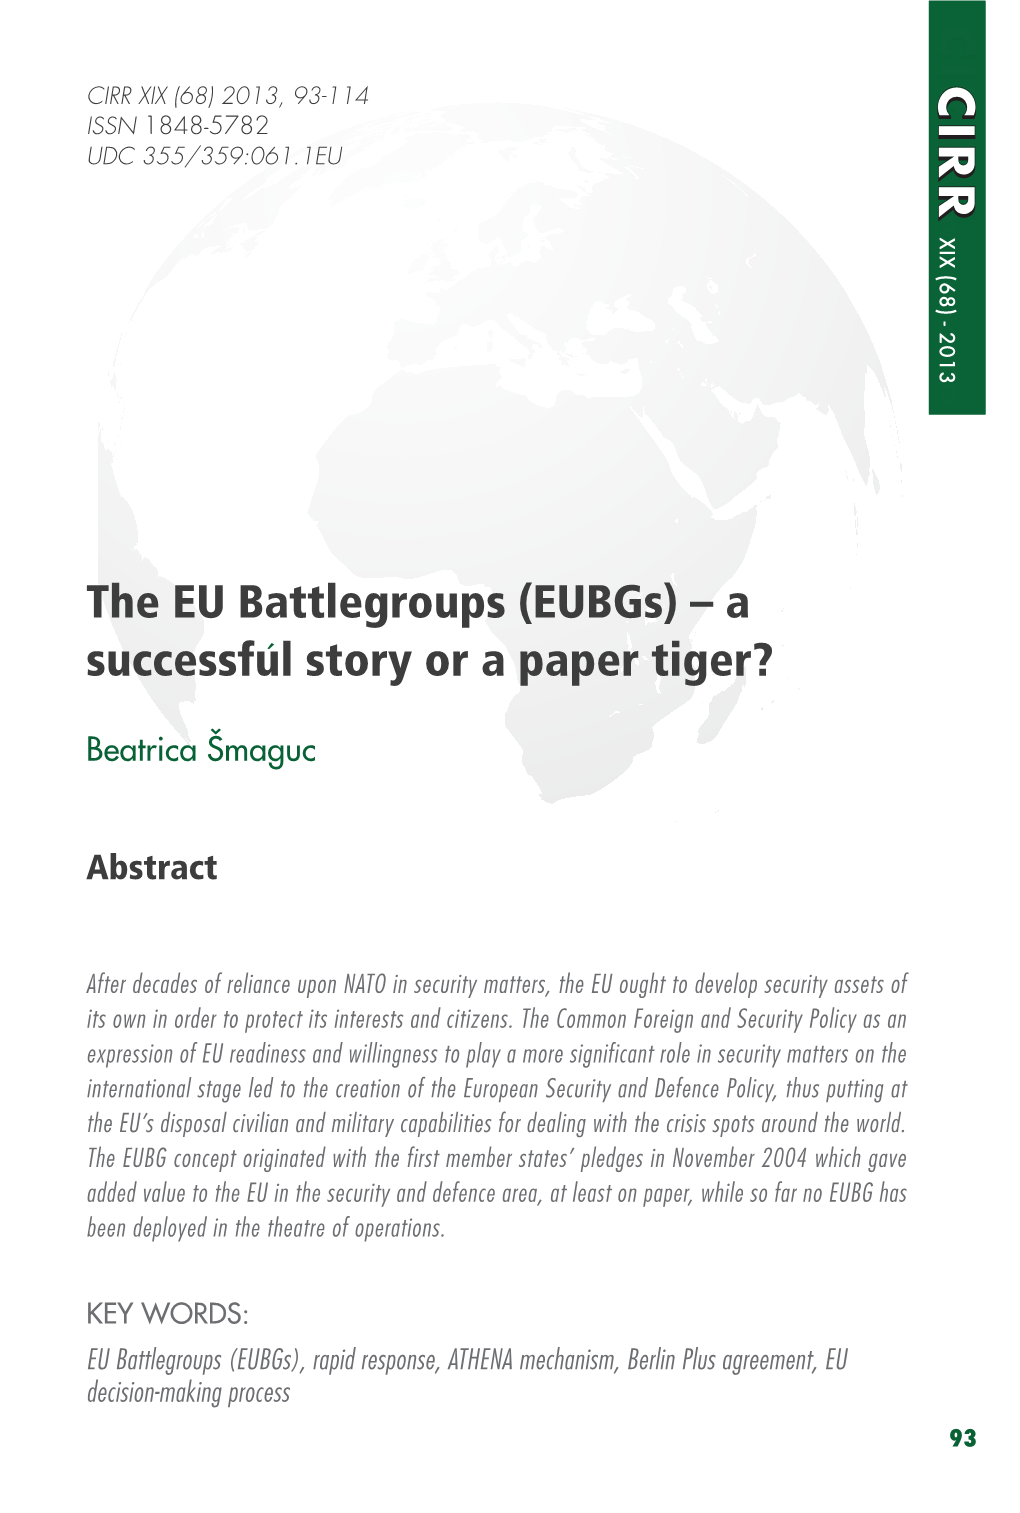 The EU Battlegroups (Eubgs) – a Successful Story Or a Paper Tiger?